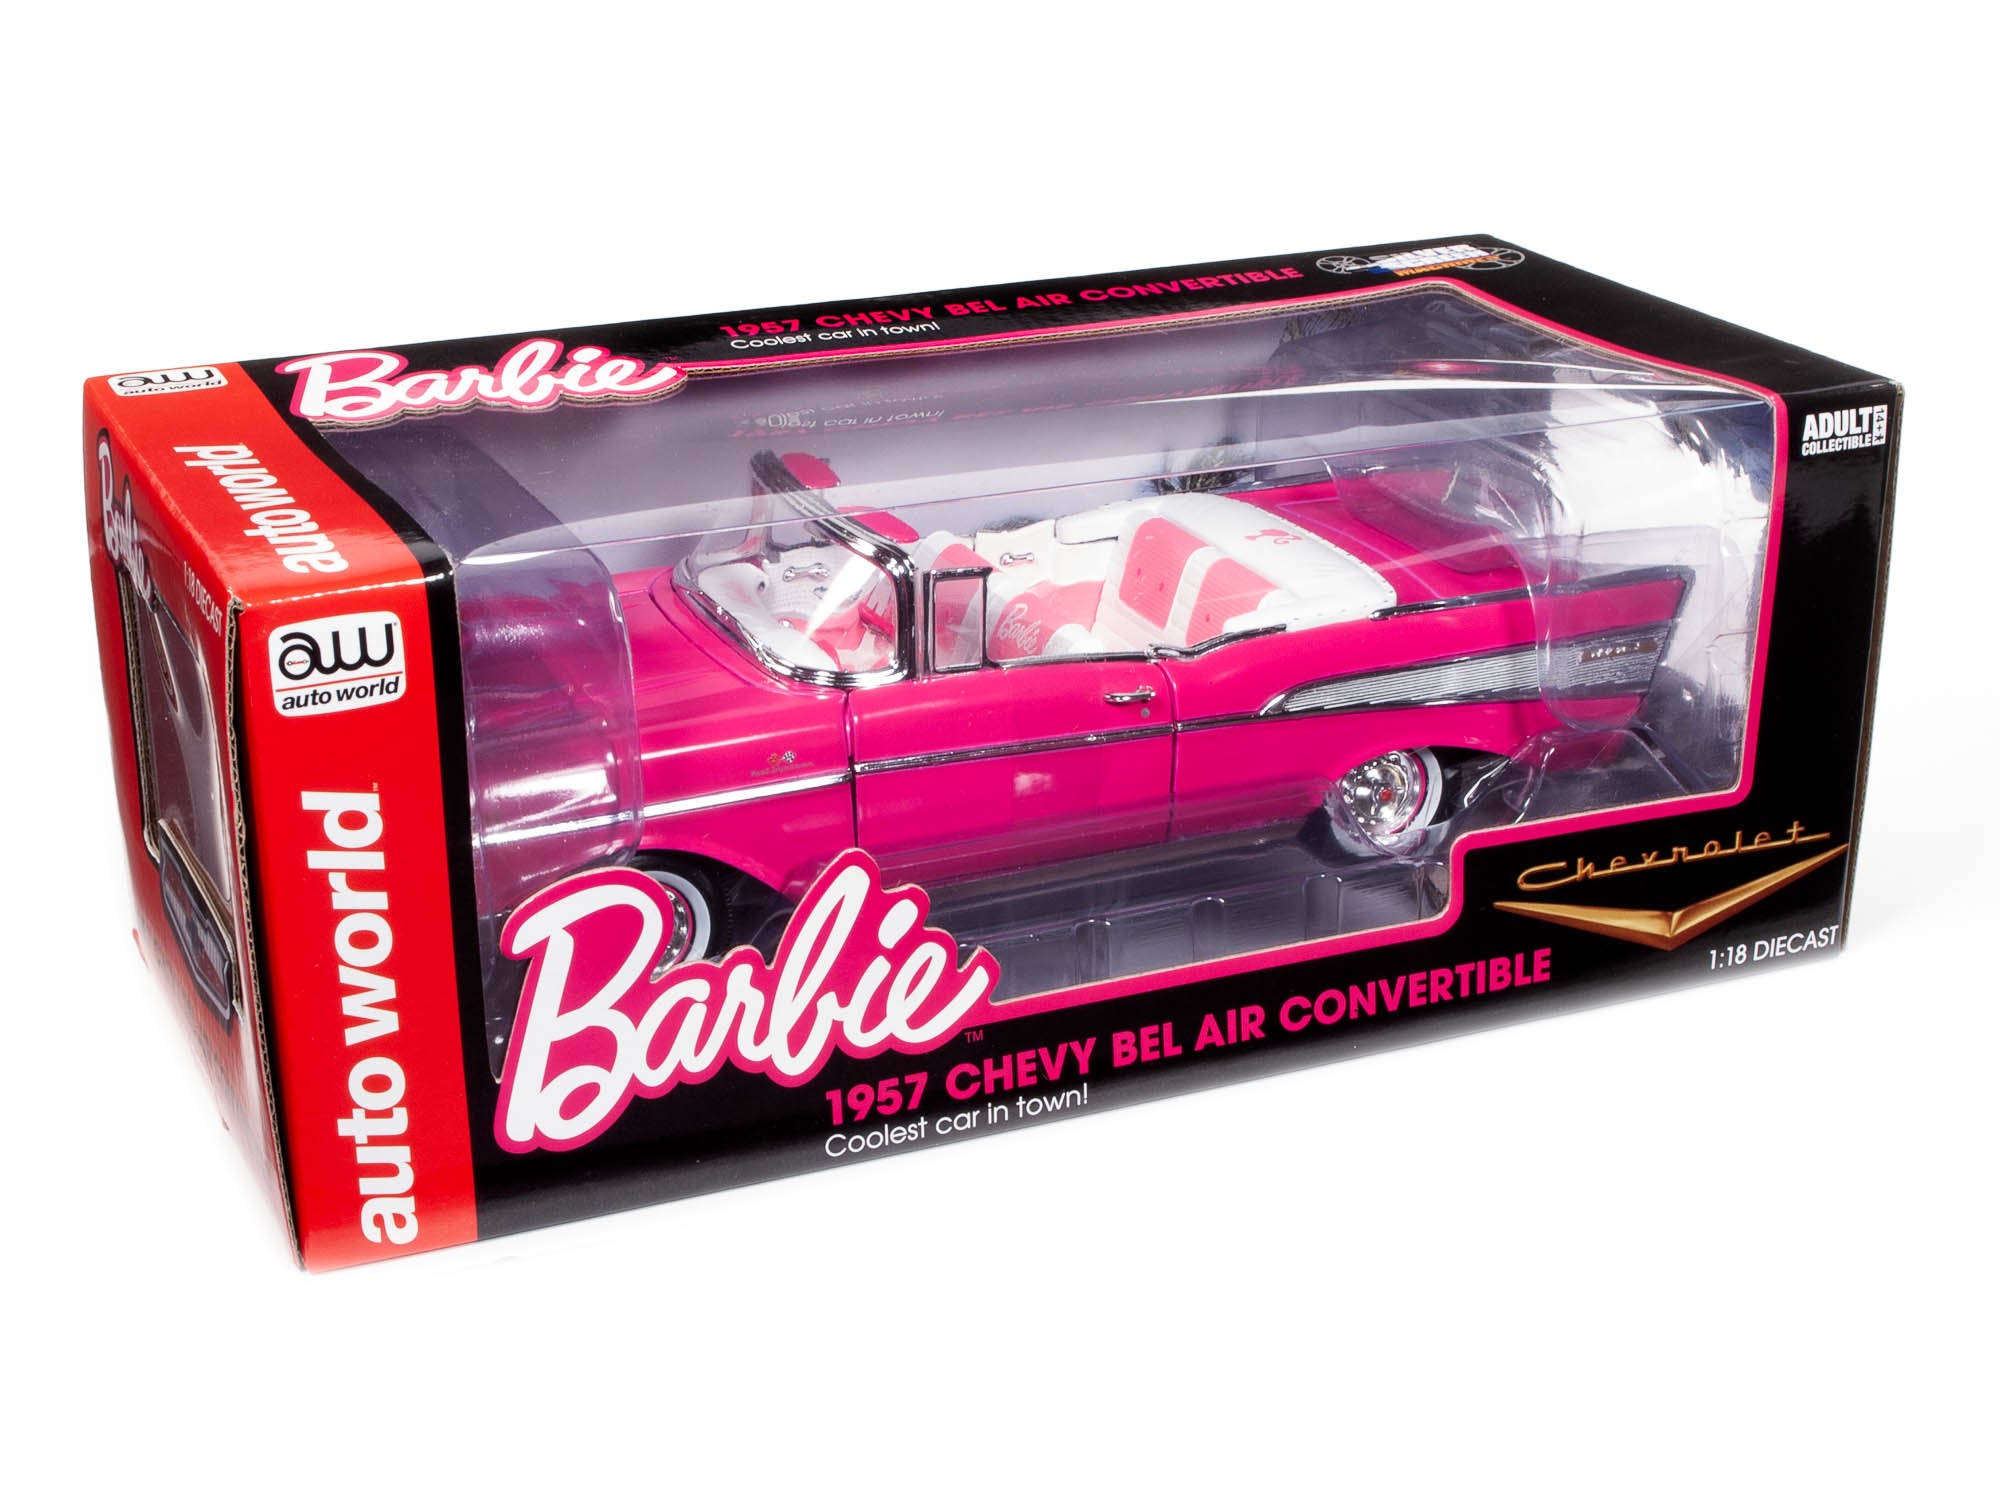 Barbie 1957 Chevy Bel Air Convertible (Pink) 1:18 Scale